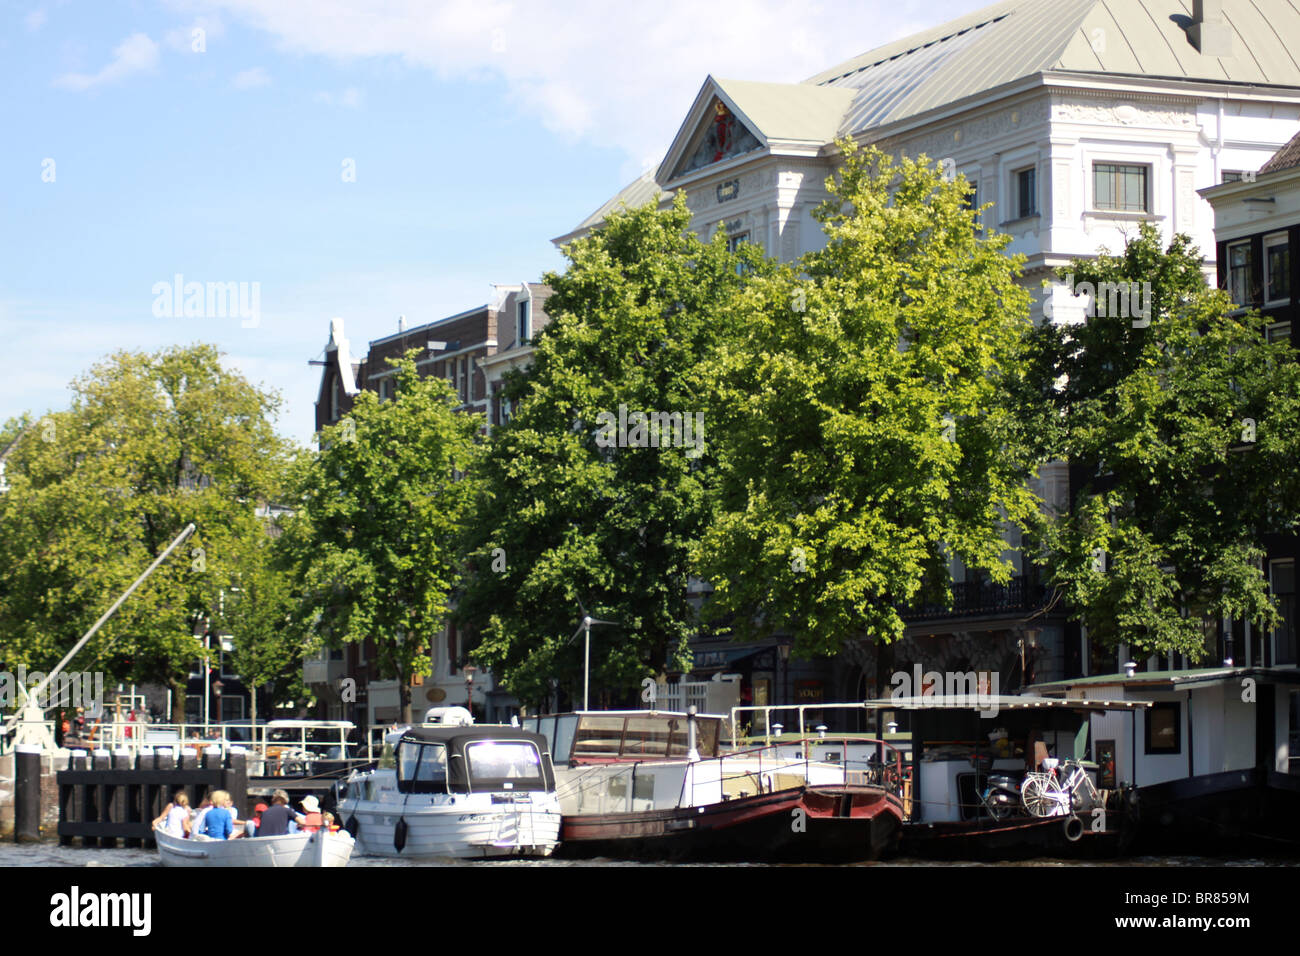 Amsterdam canal side hotel boats Stock Photo